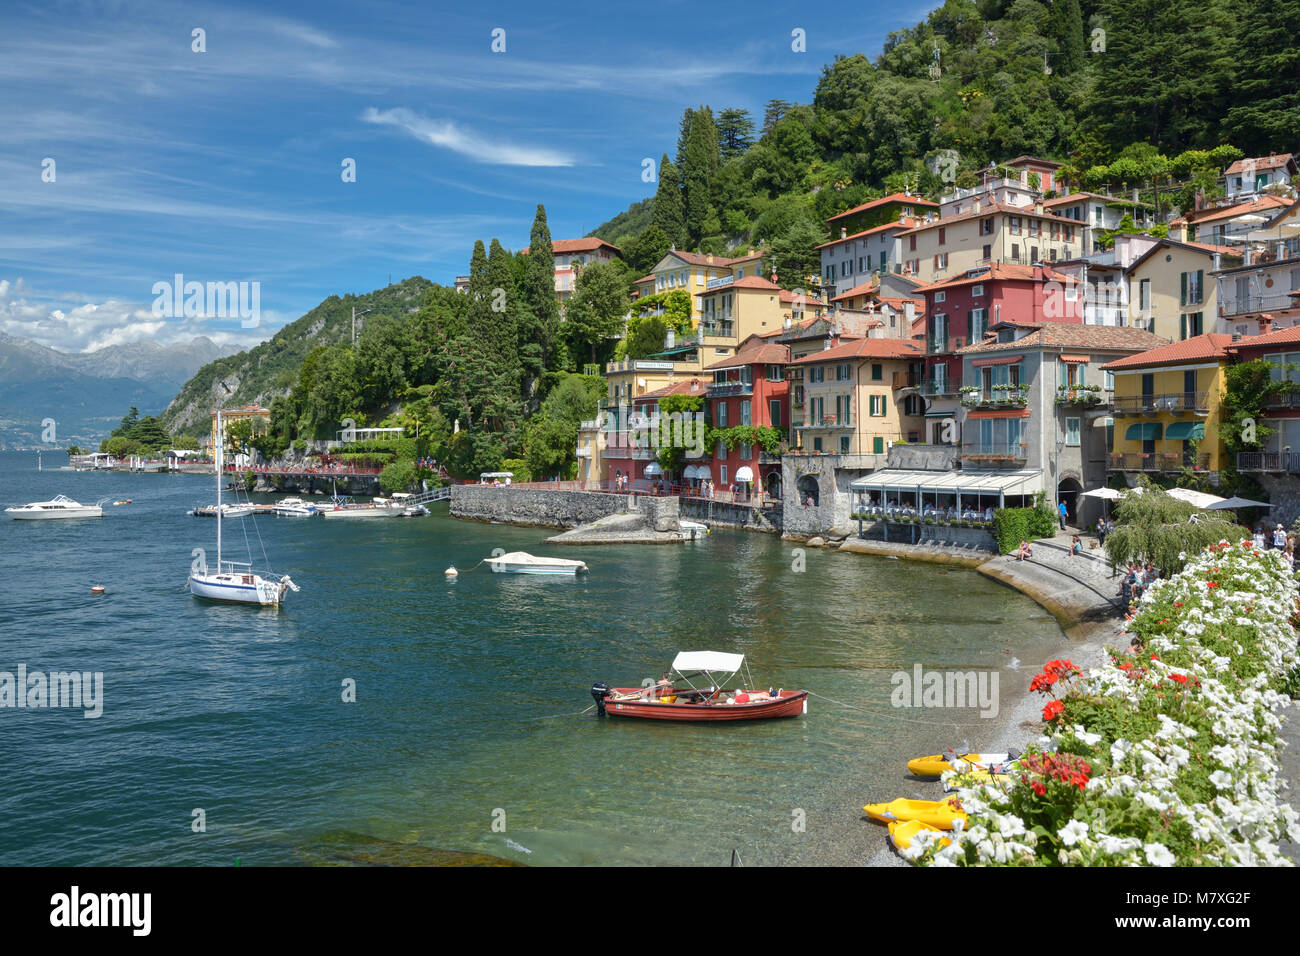 VARENNA, ITALY - AUGUST, 2017 - Small harbor in Varenna at lake Como in Italy Stock Photo